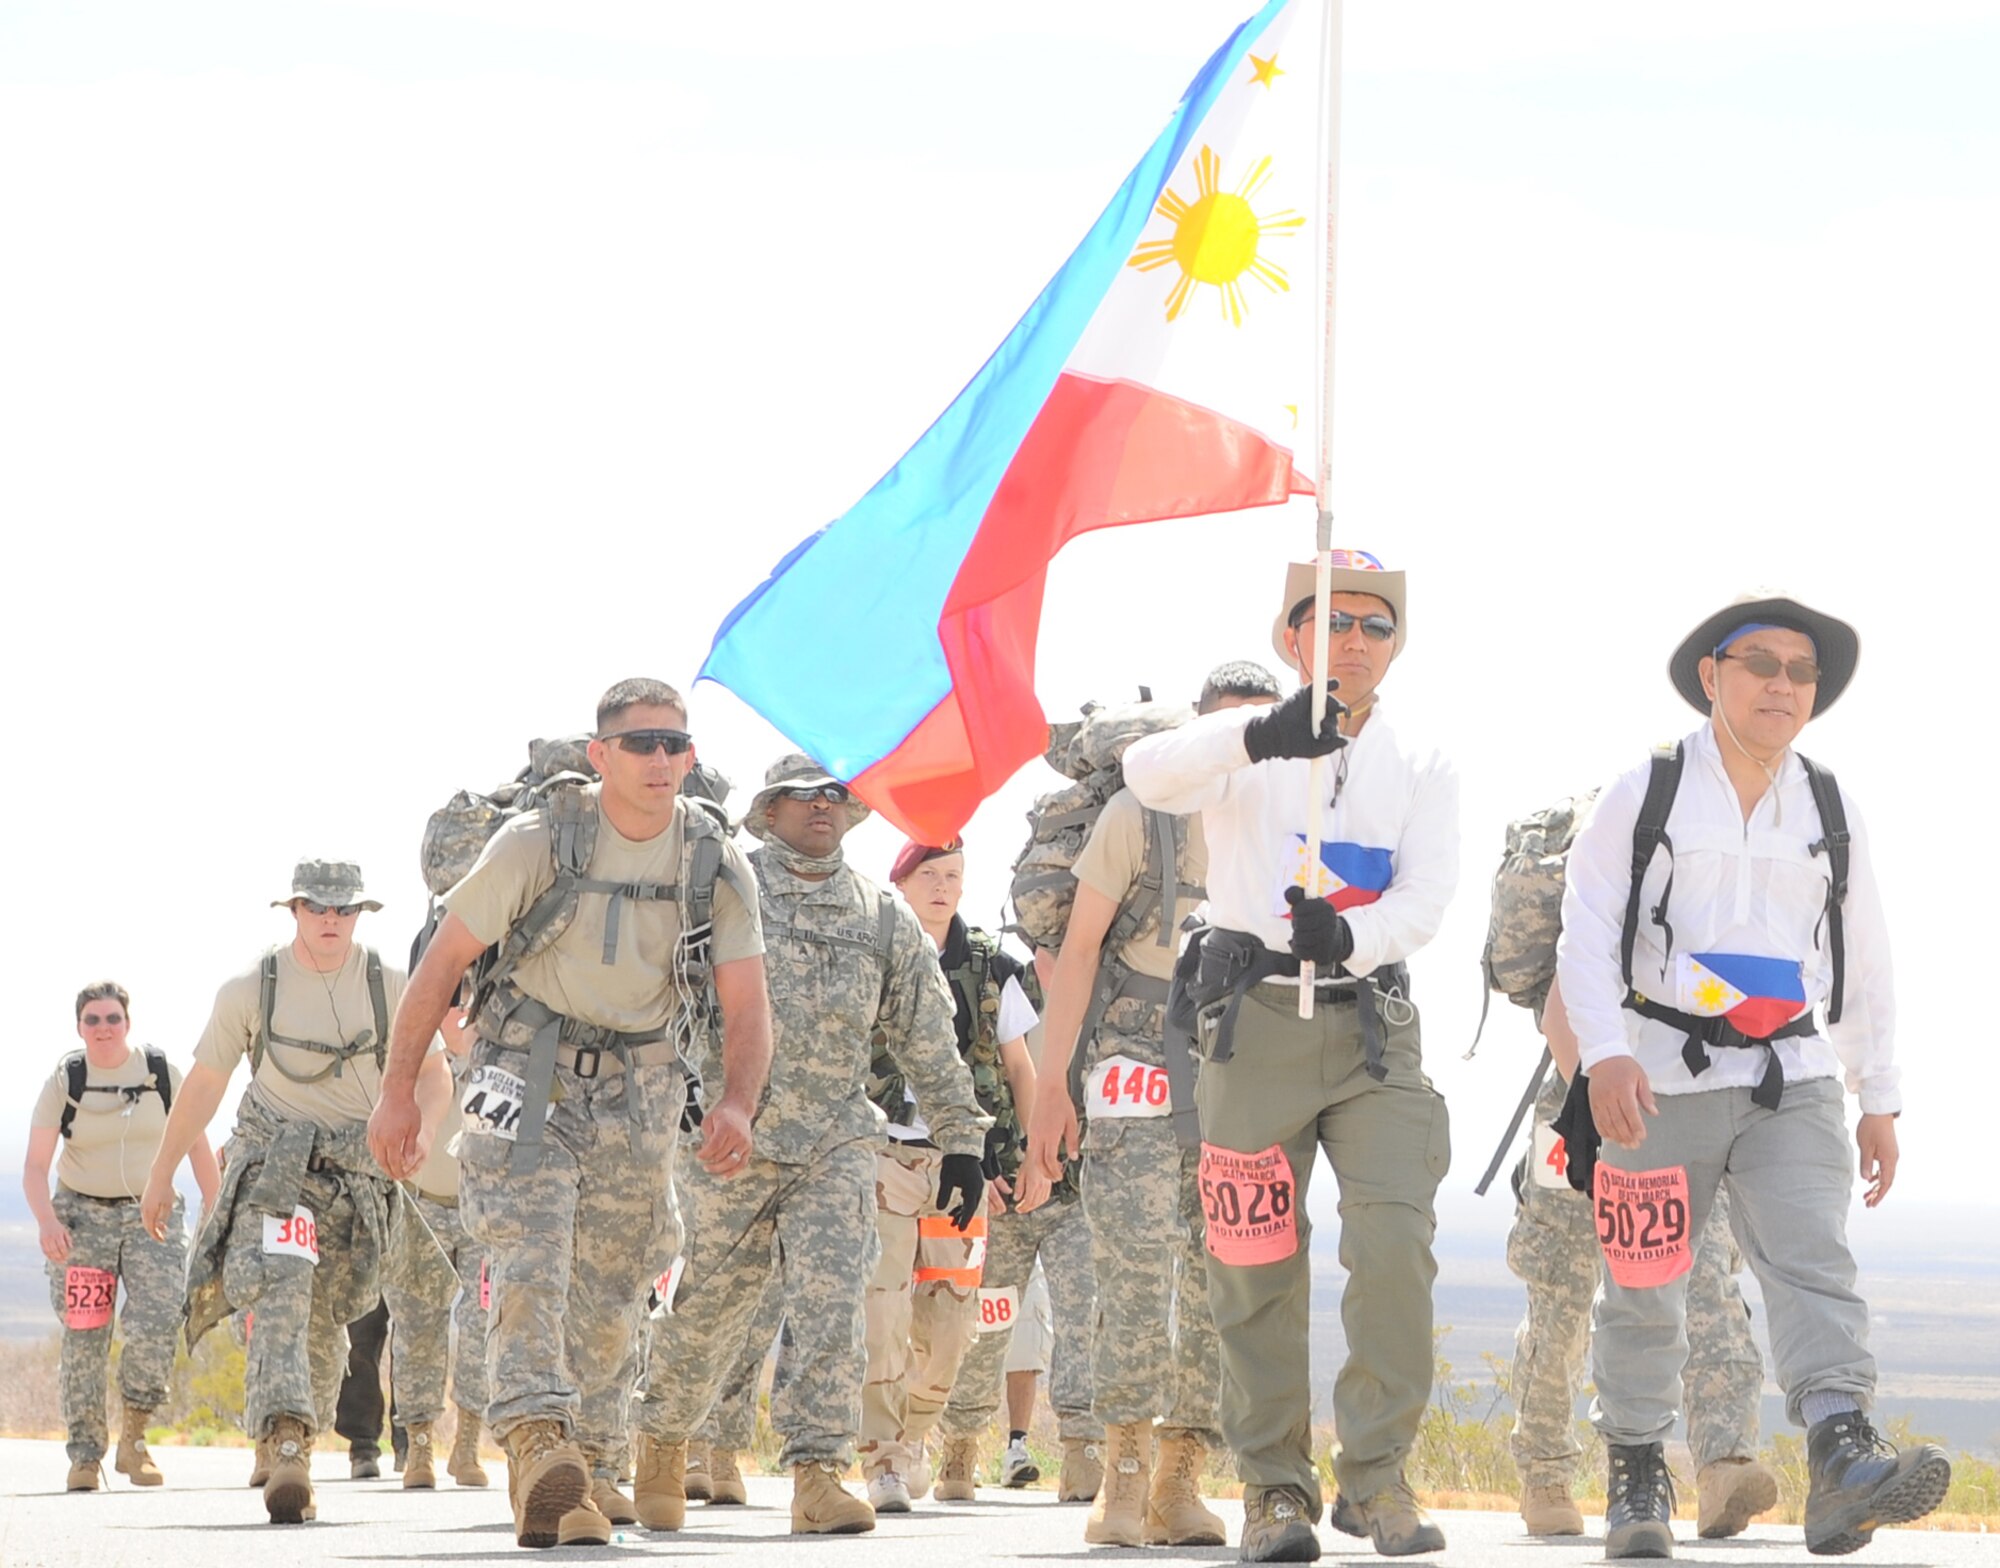 Participants from all over the world tread the rigourous 26-mile course at White Sands Missile Range, N.M., March 29, as part of the Bataan Death March. The  March honors a special group of World War II heroes who were responsible for the defense of the islands of Luzon, Corregidor and the harbor defense forts of the Philippines. (U.S. Air Photo/ Airman 1st Class DeAndre Curtiss)